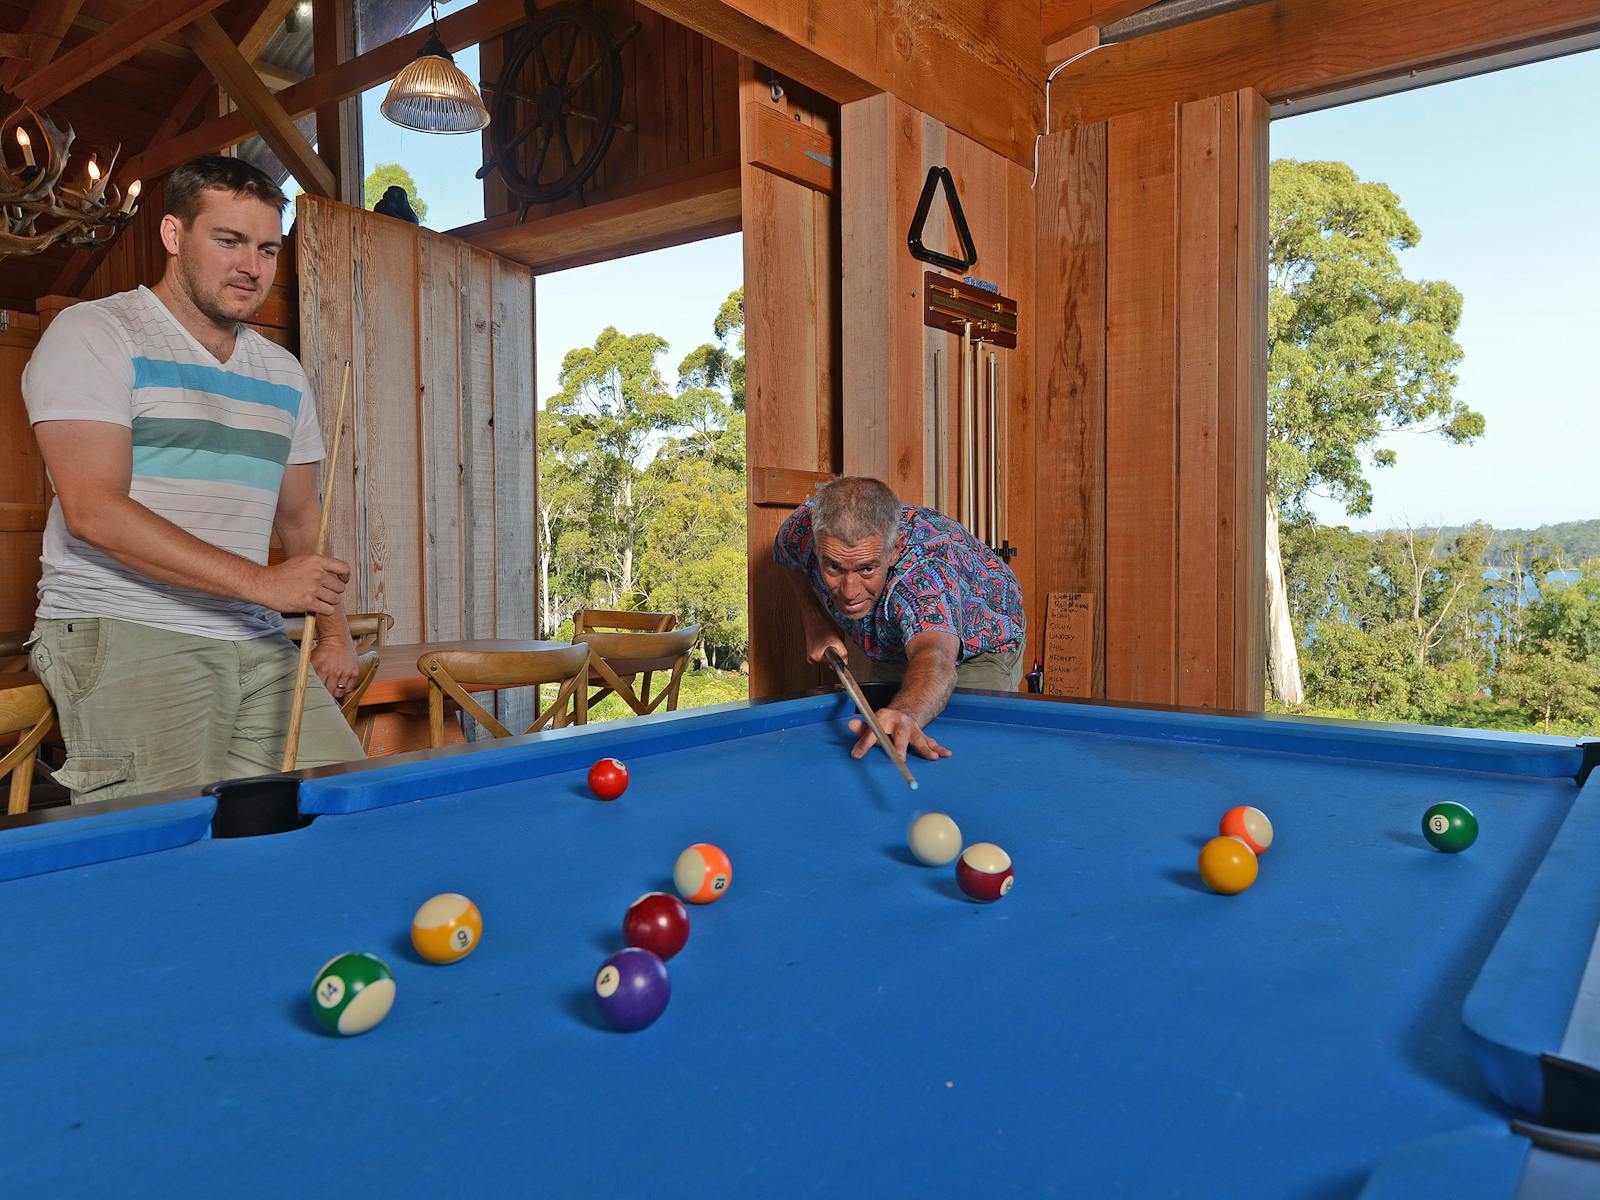 Playing pool at Bruny Island Lodge with view out to Mickeys Bay